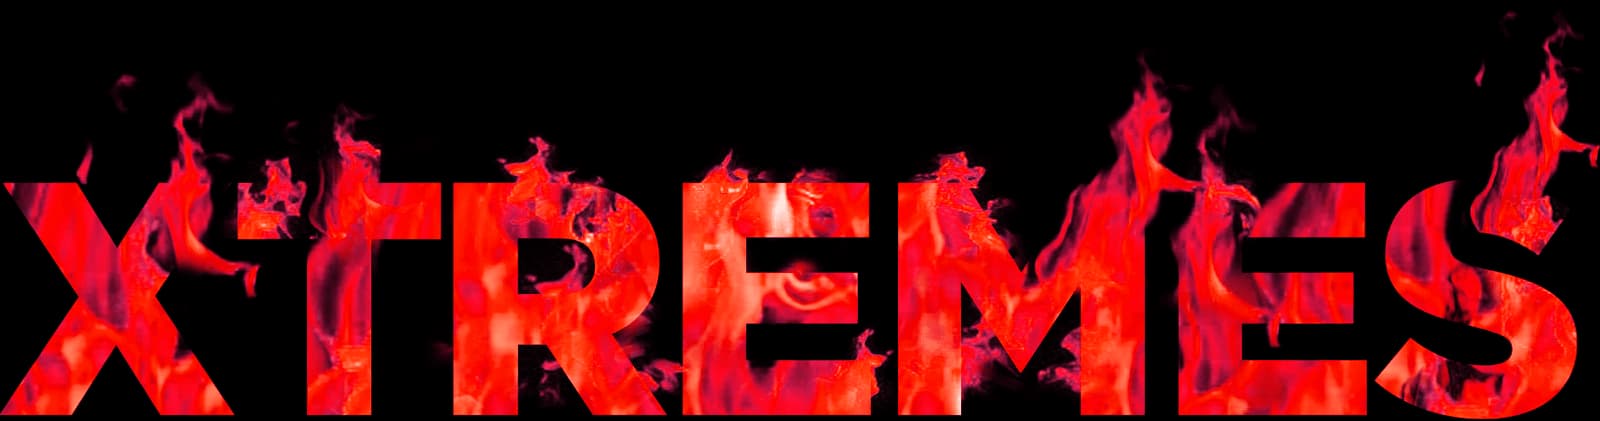 Xtremes Headline Graphic in Flames